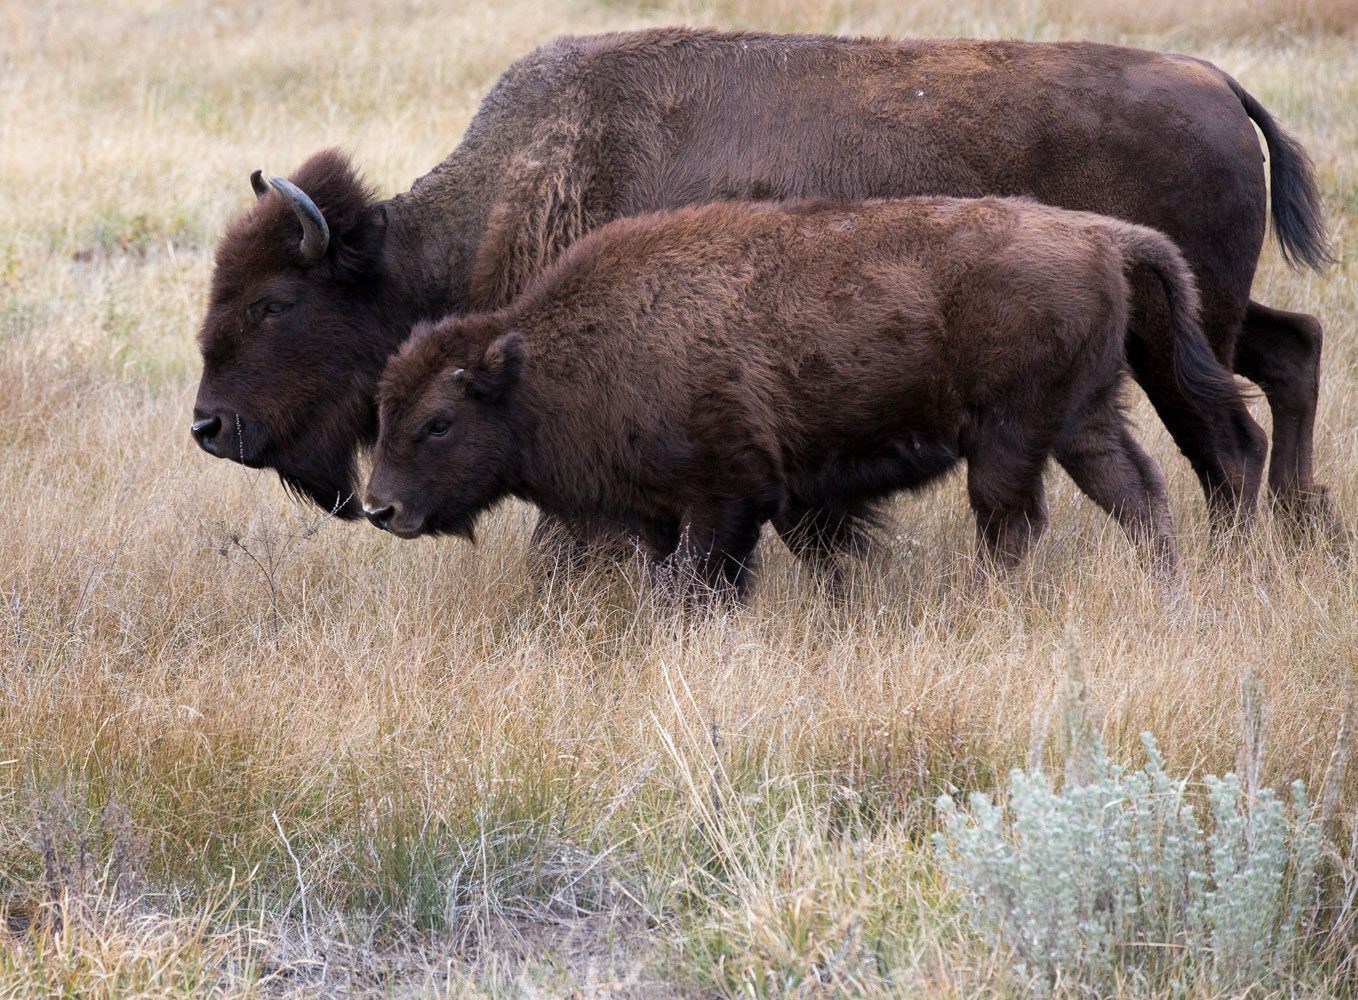 A bison leads her half year old calf across the brown meadow.